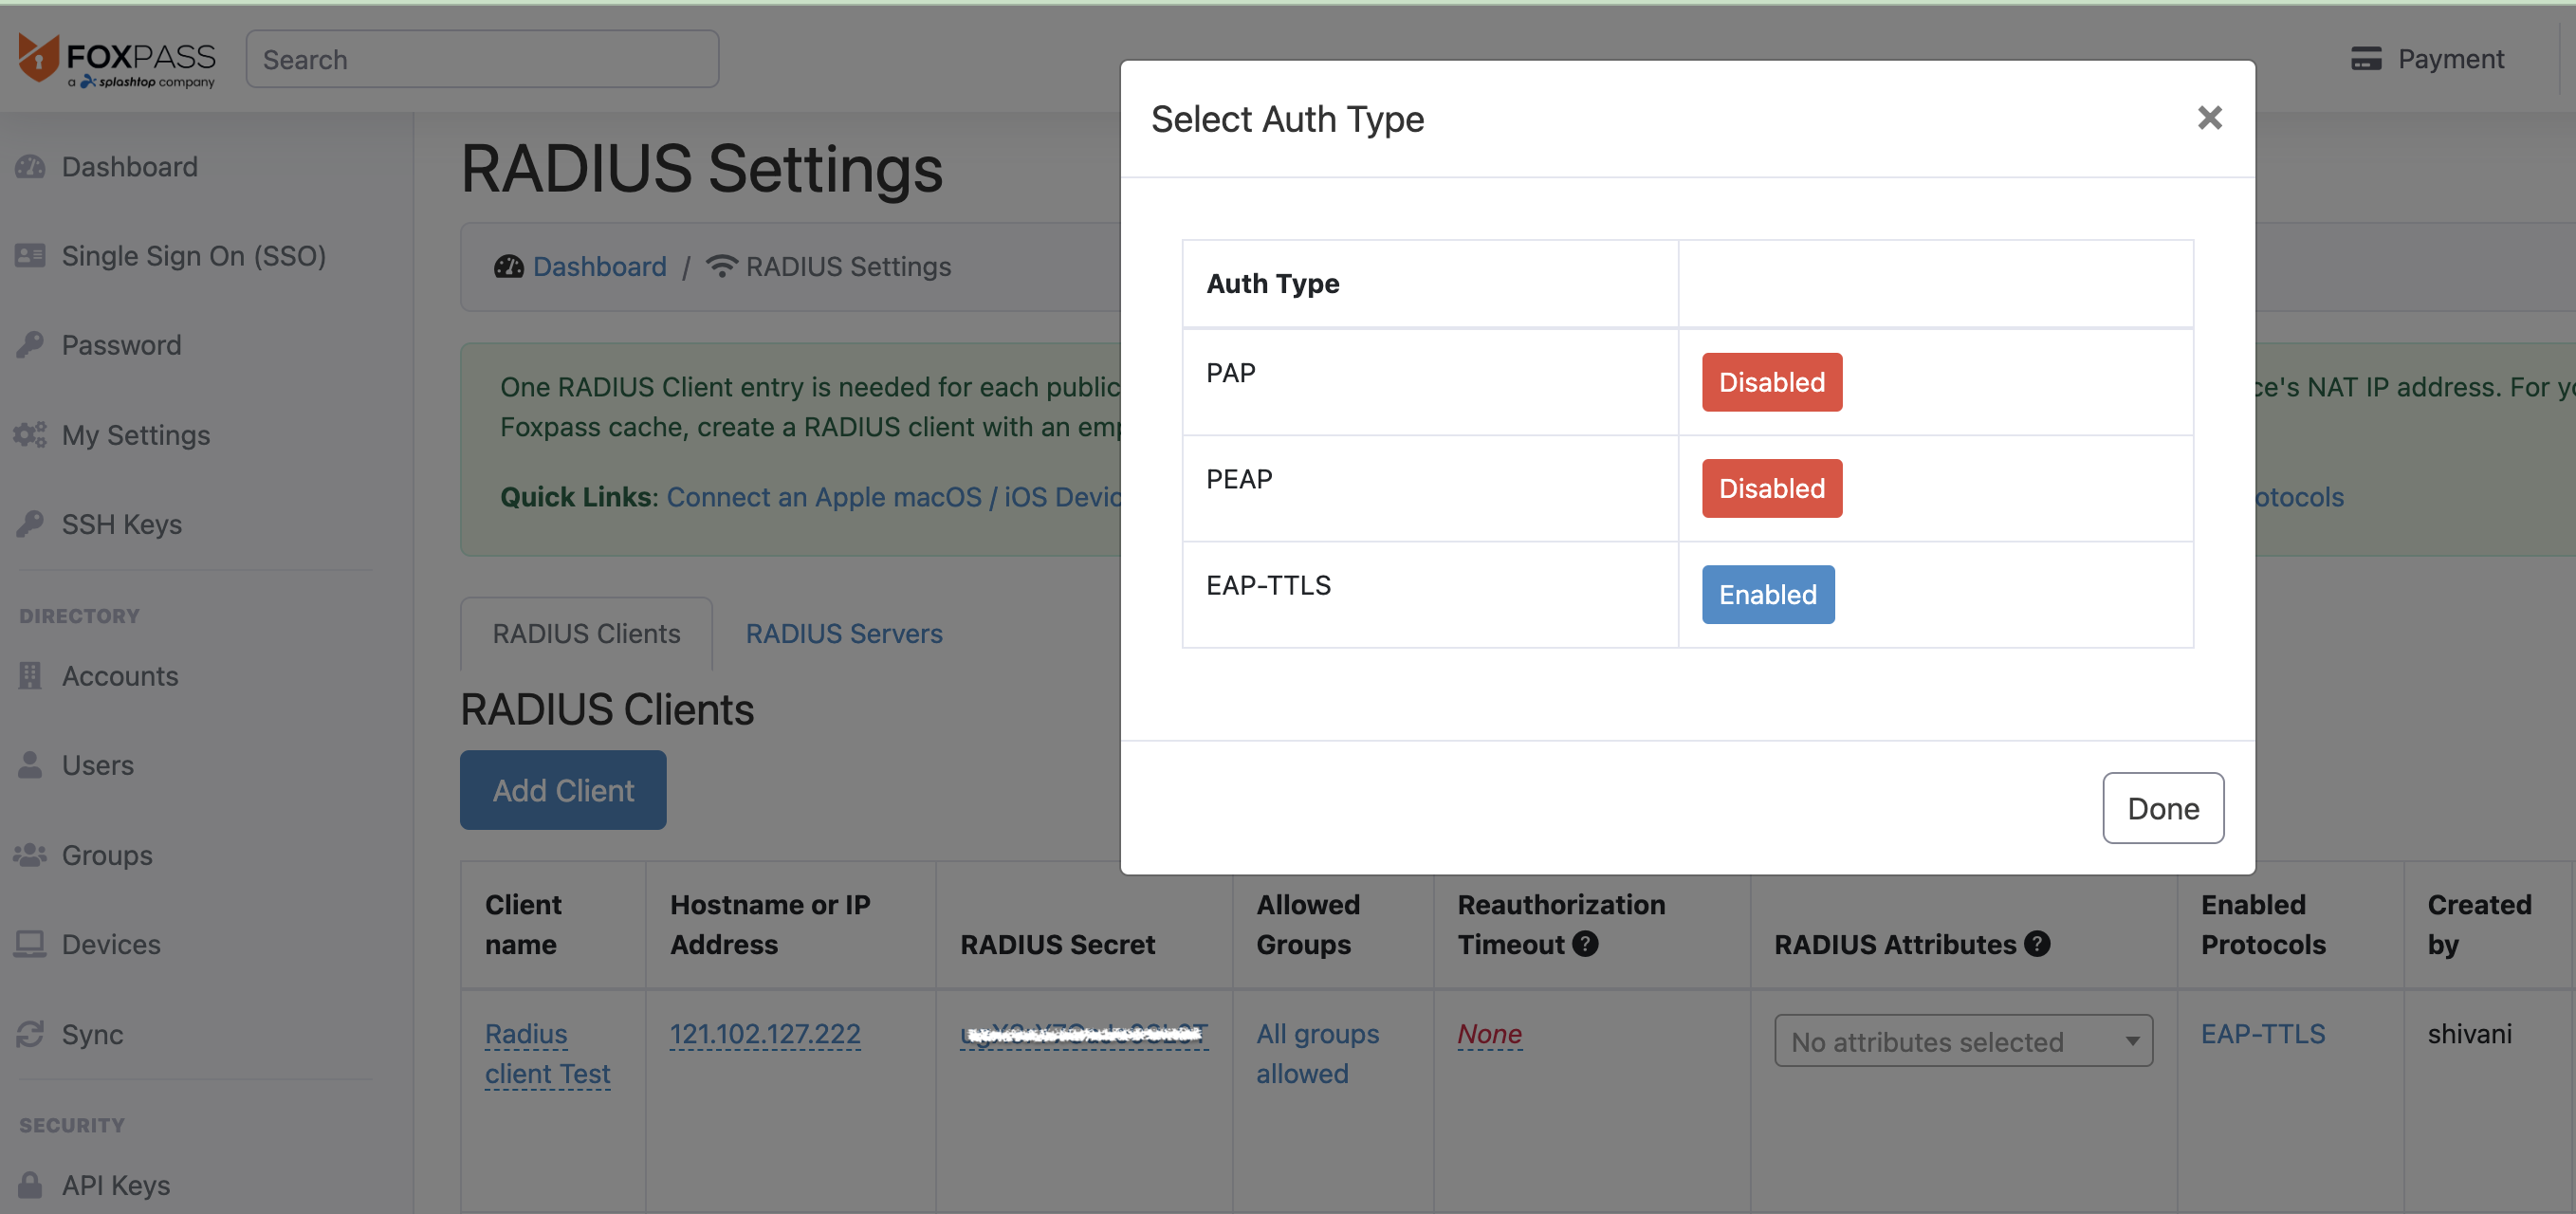 Enable/ Disable auth type depending on your use case